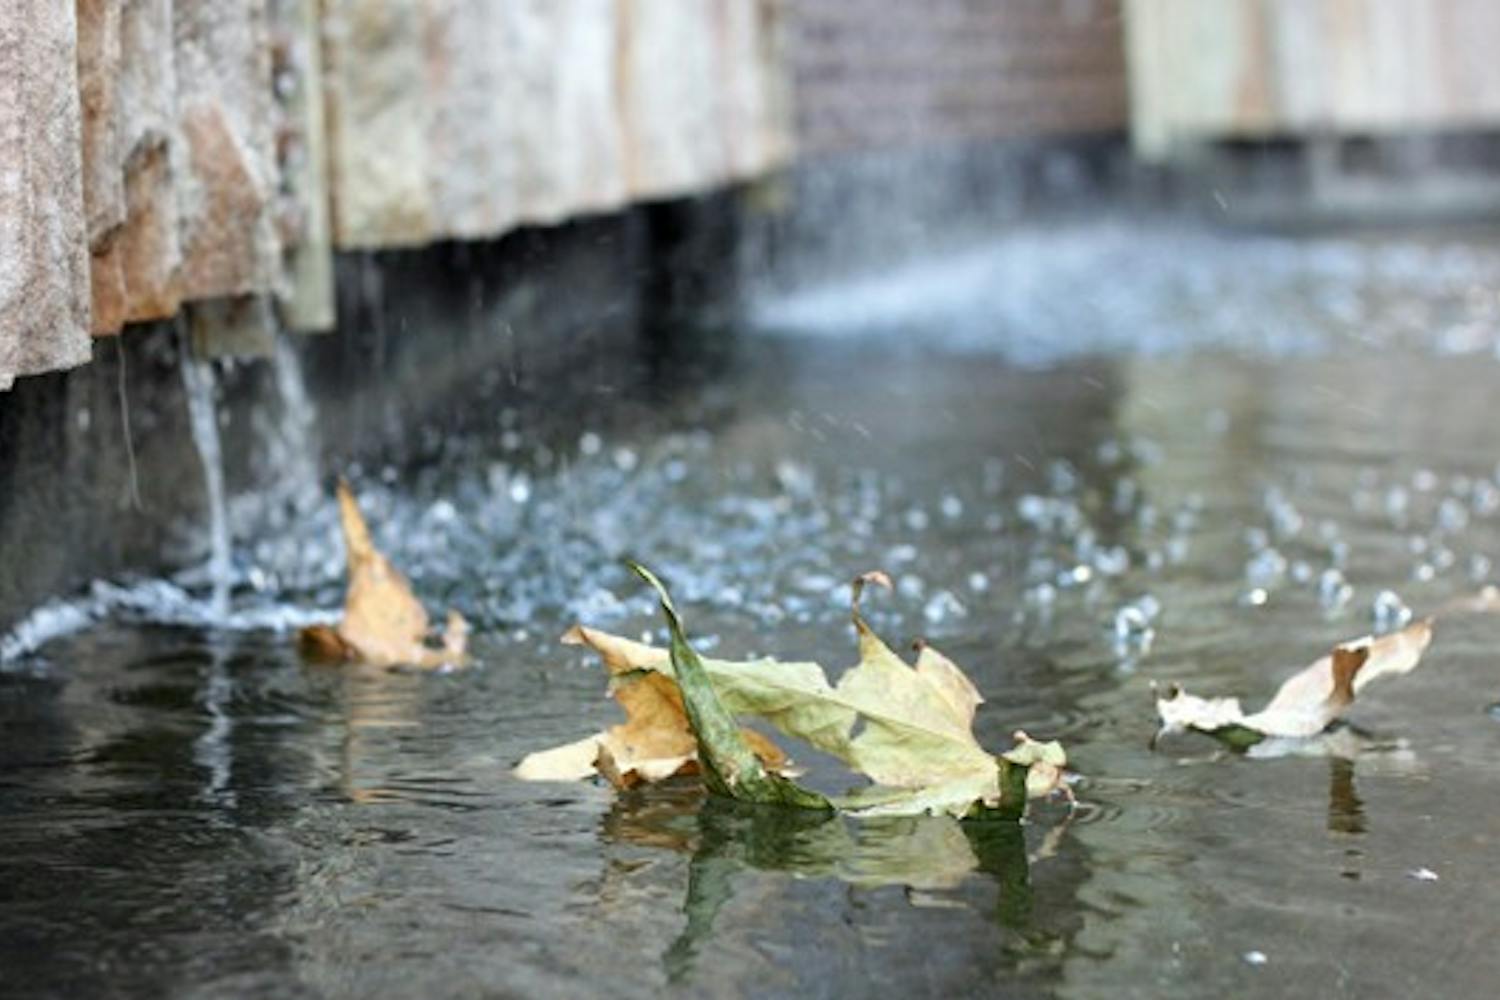 LEAF BOATS: Fallen leaves swirl around in a fountain outside the Fulton Center Oct. 20. (Photo by Beth Easterbrook)